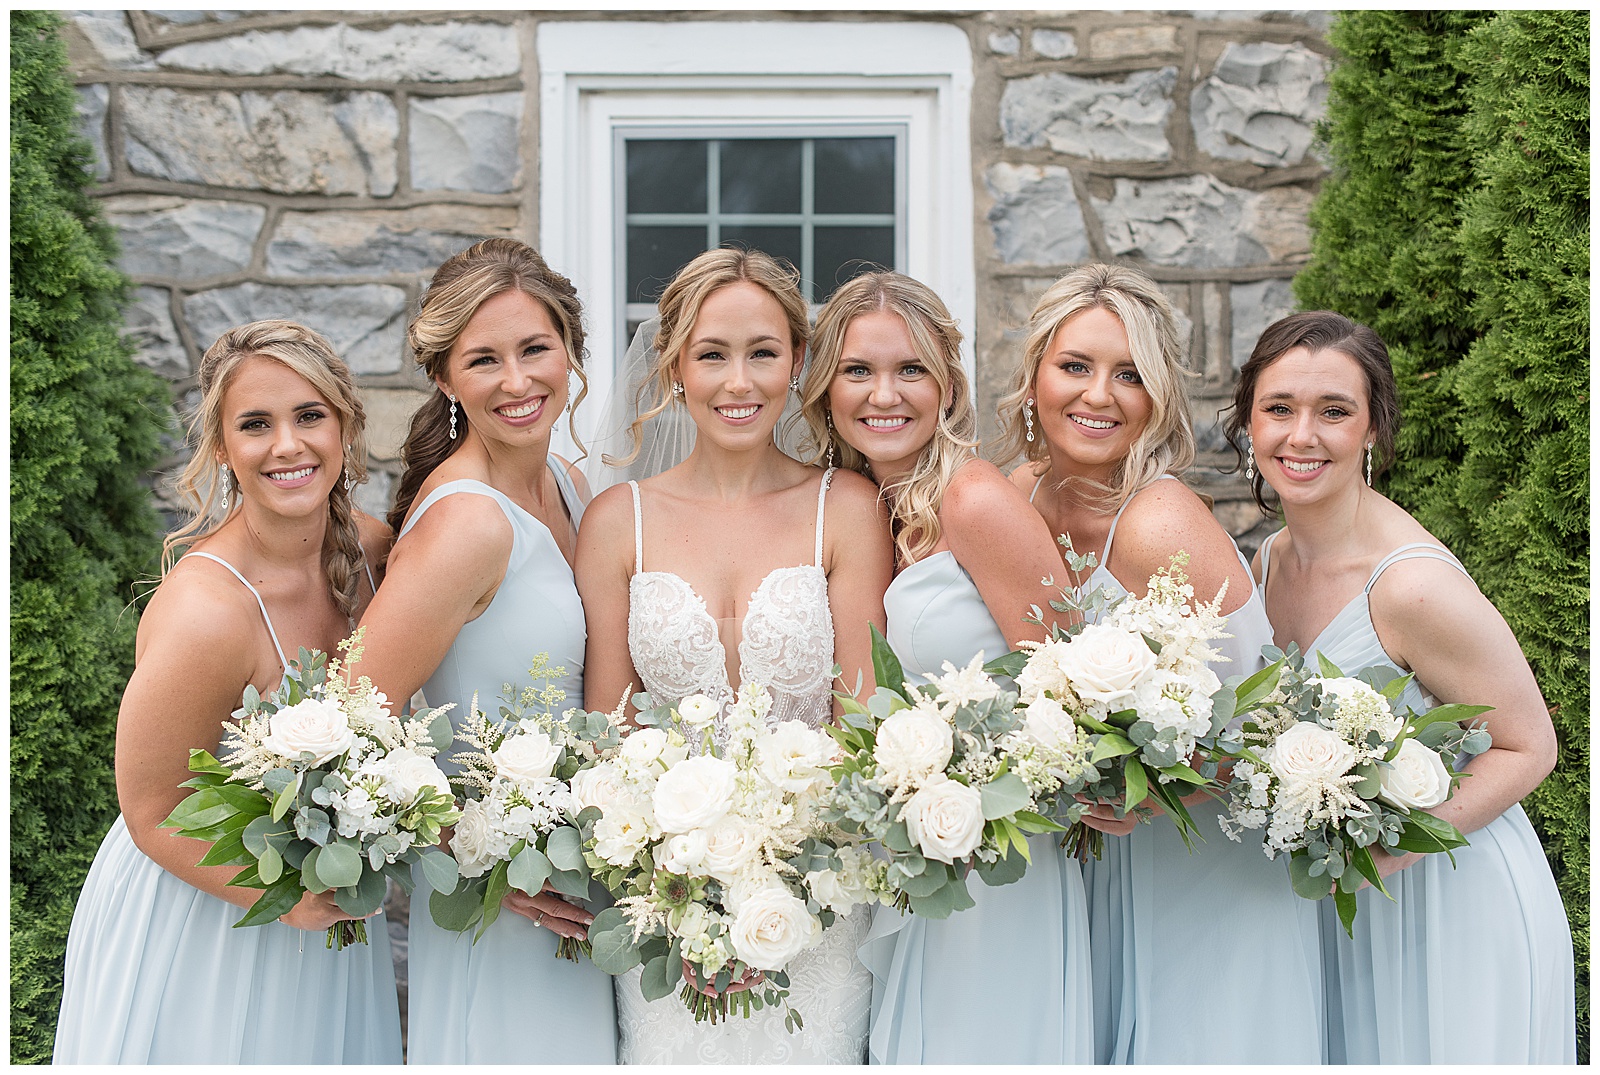 bride surrounded by her five bridesmaids wearing light blue gowns and everyone holding bouquets by historic stone building